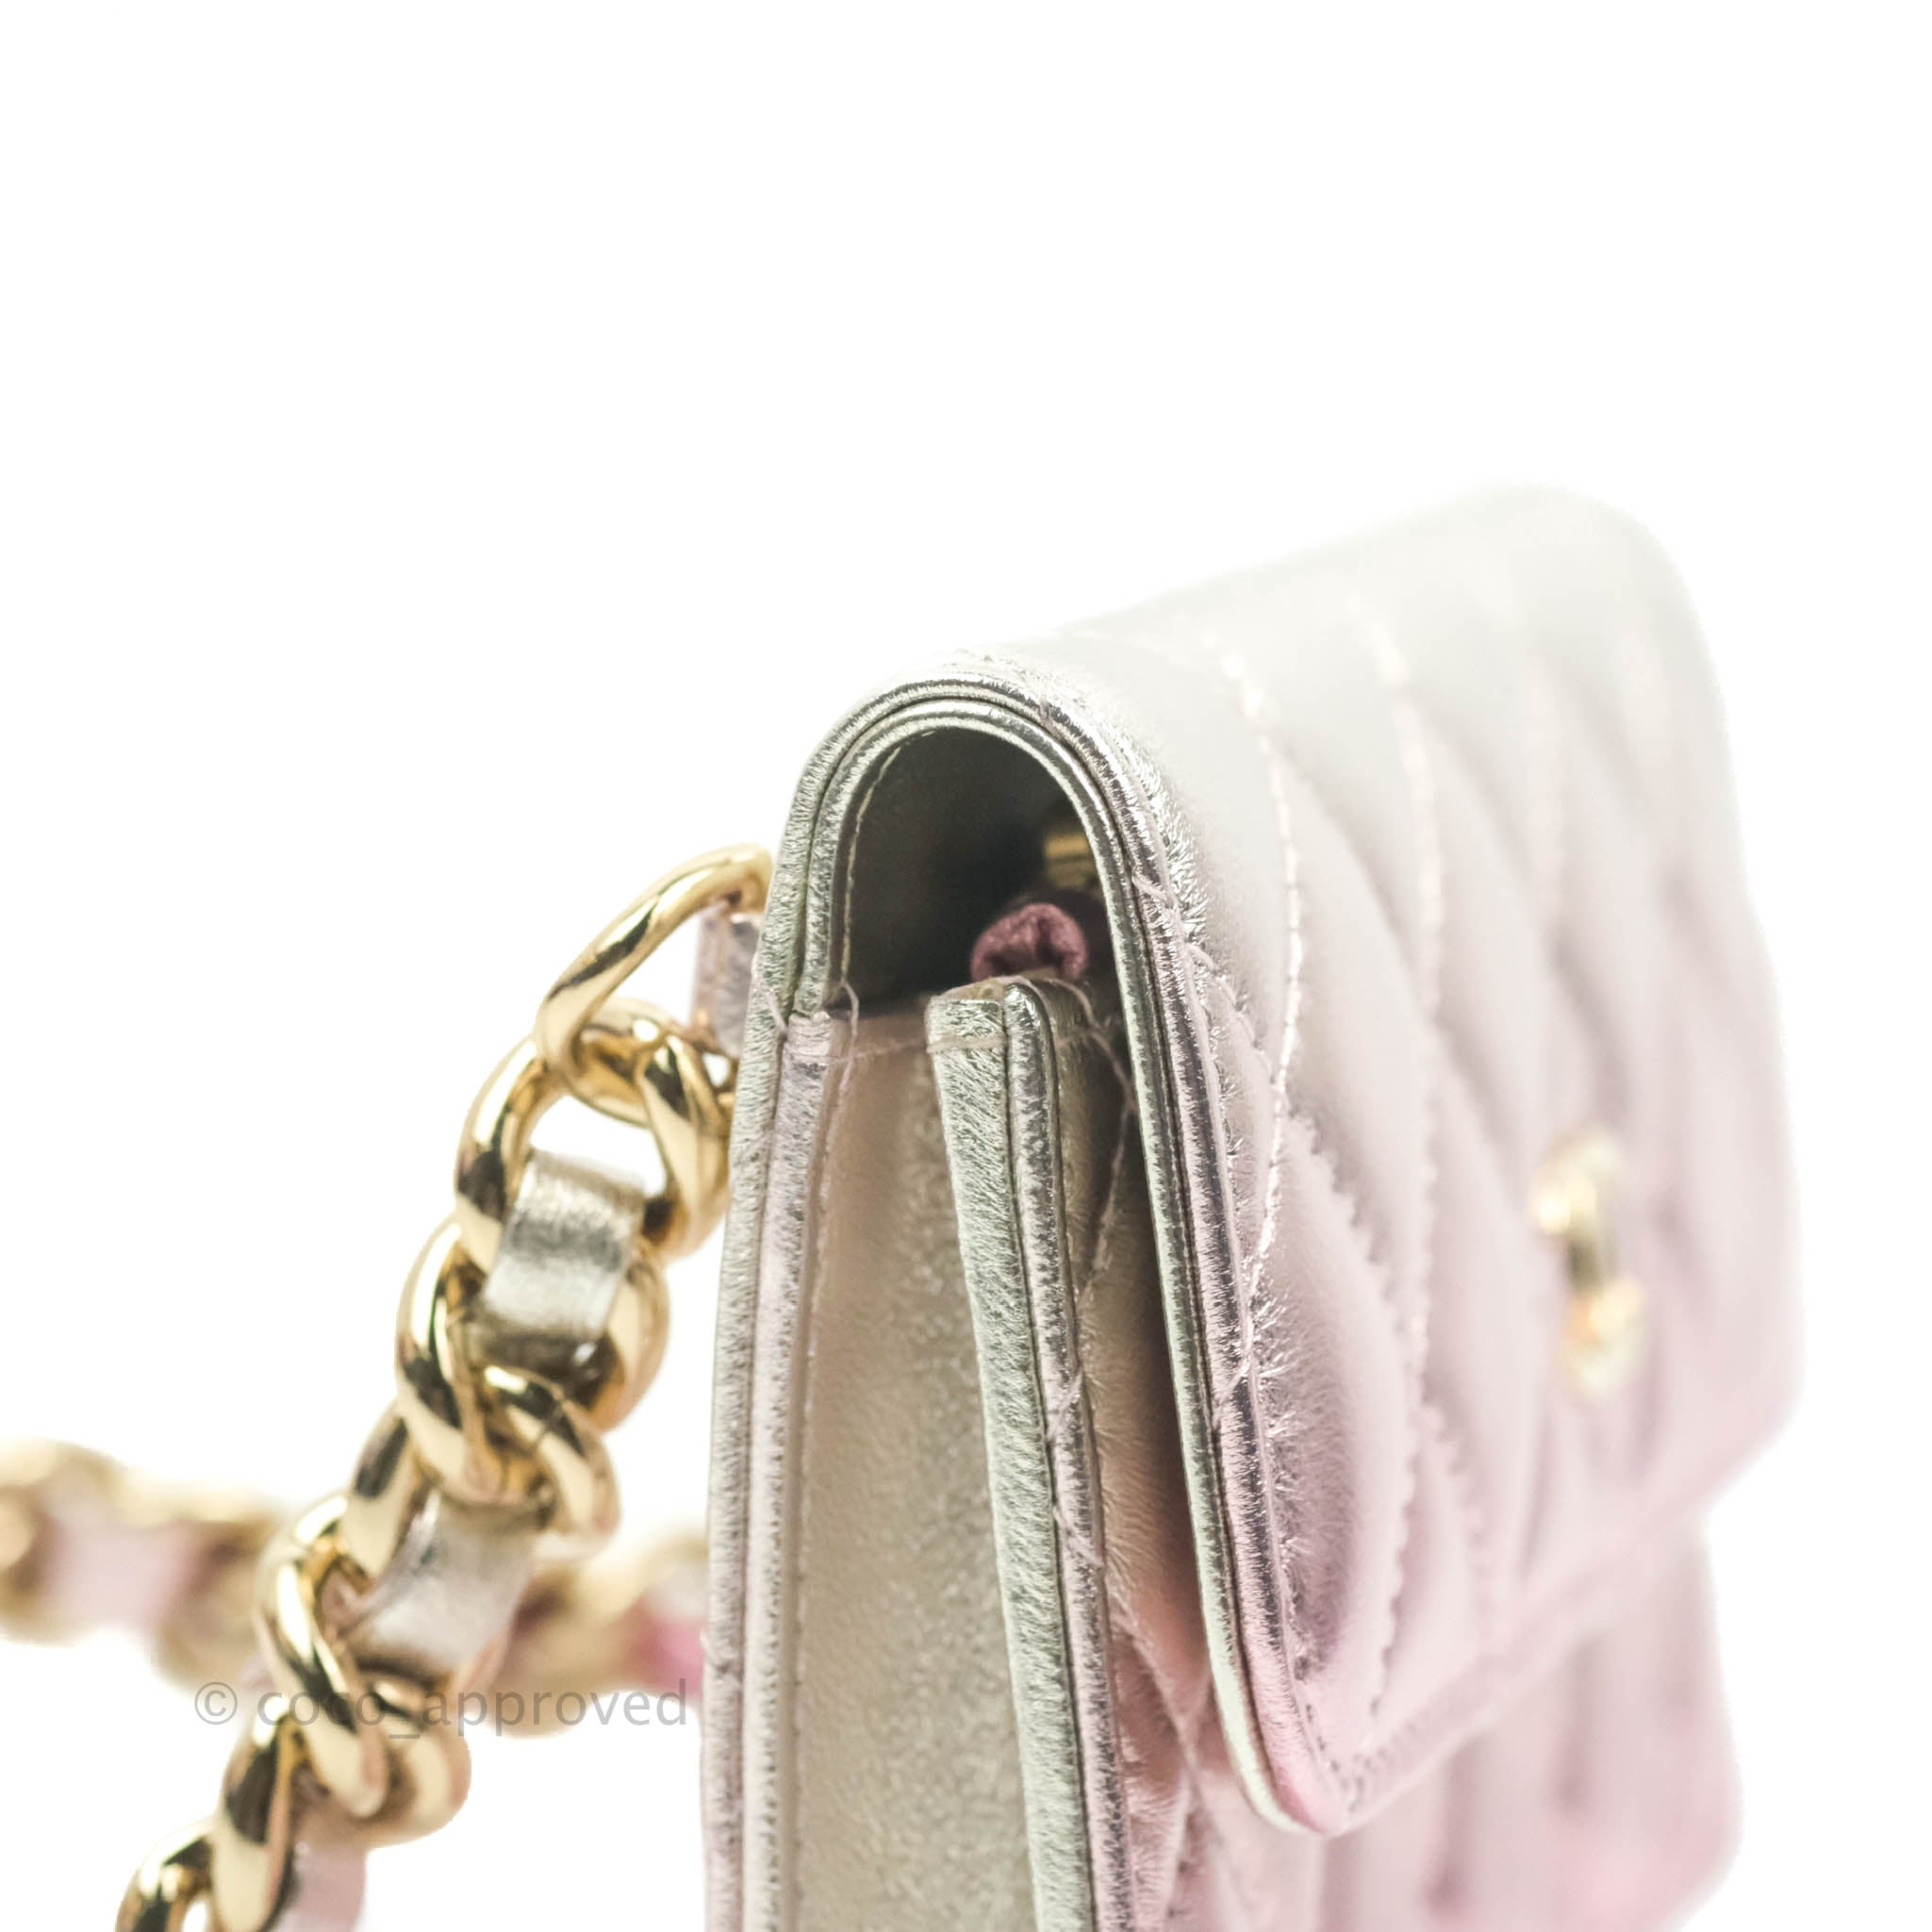 Chanel Quilted Clutch with Chain Metallic Gradient Pink/Silver Lambski –  Coco Approved Studio